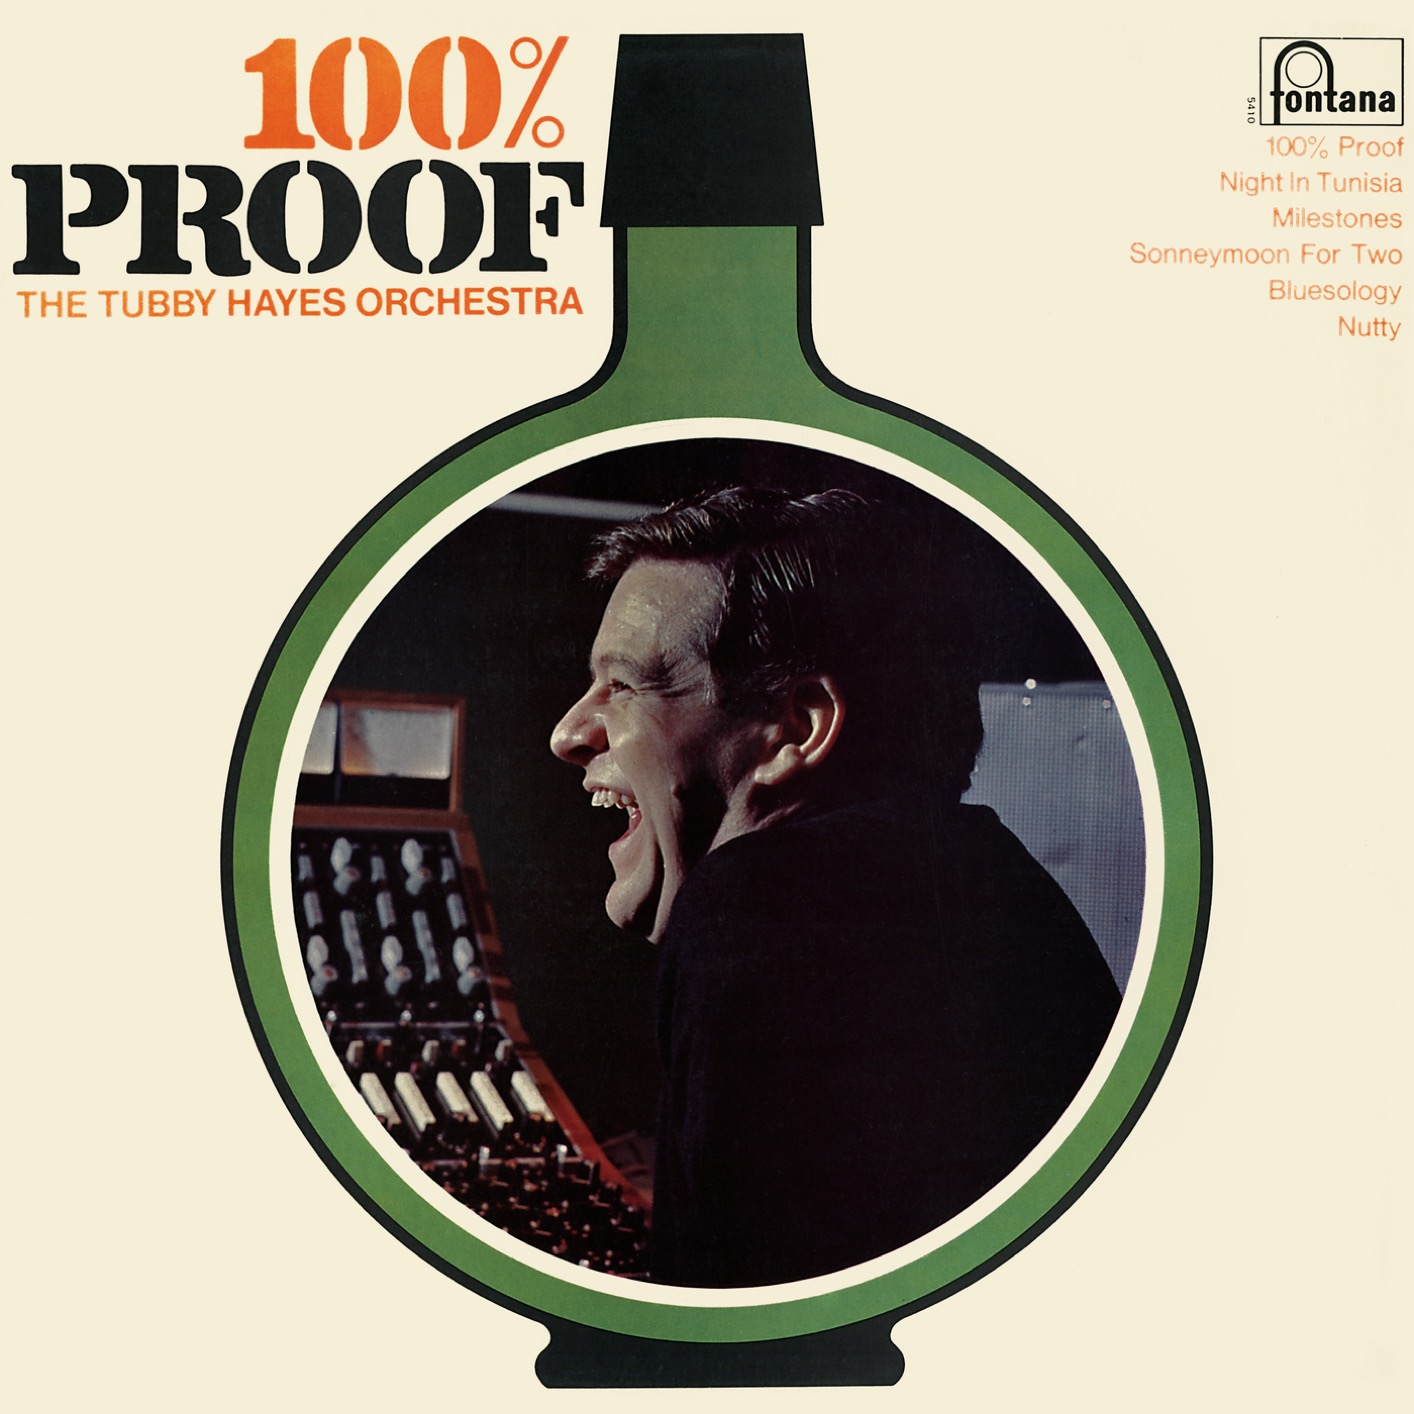 The Tubby Hayes Orchestra – 100% Proof (Remastered) (1967/2019) [FLAC 24bit/88,2kHz]